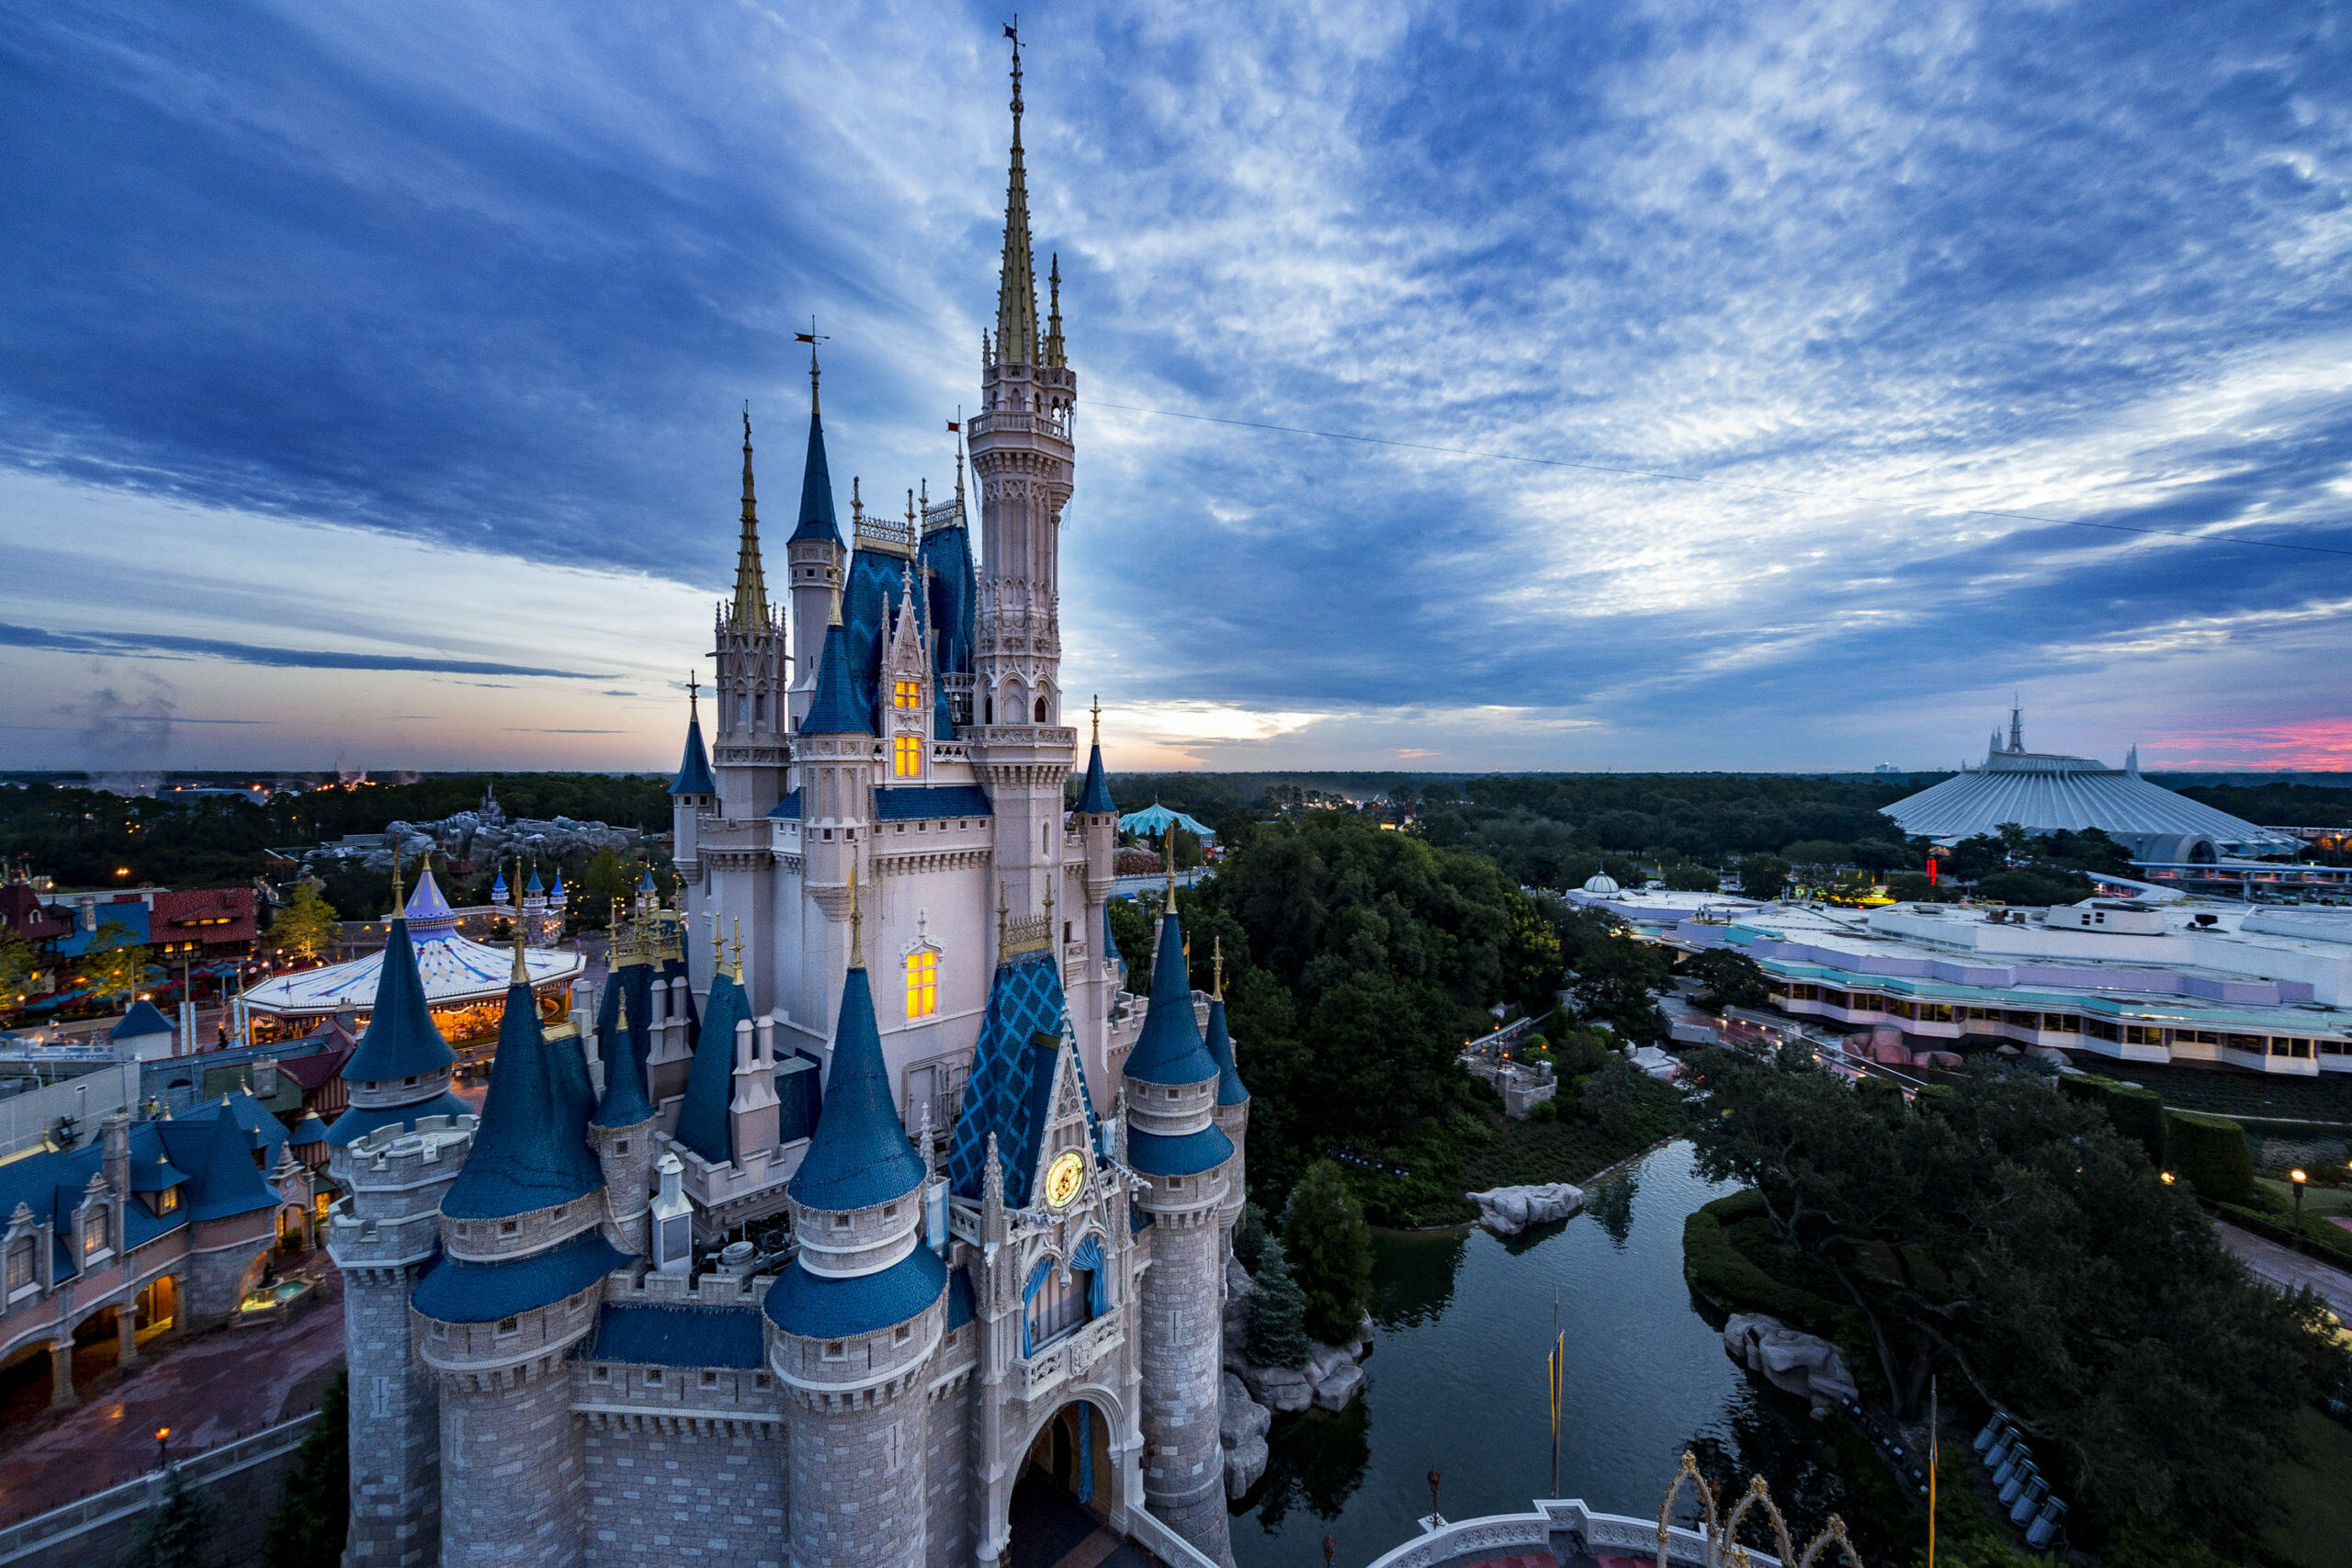 Disney To Layoff 7,000 Employees As Part Of 5.5 Billion Cost Reduction